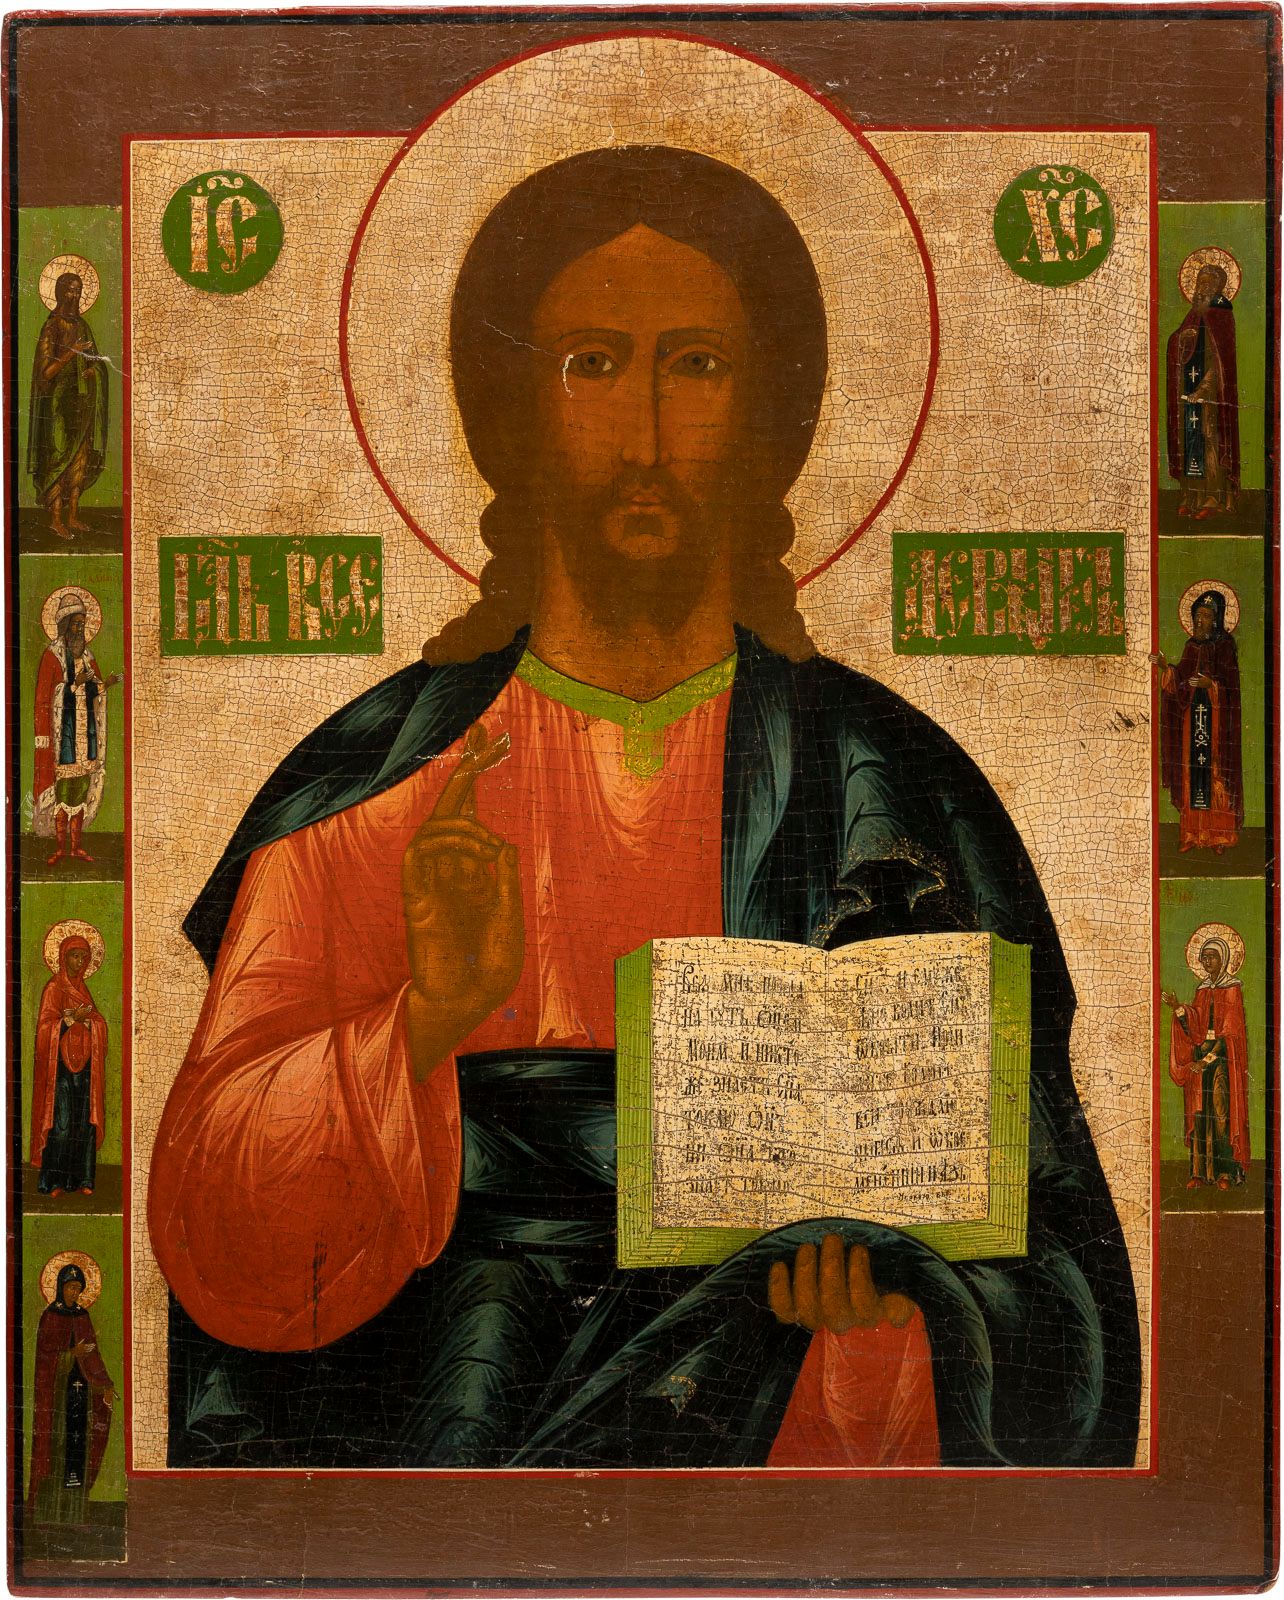 A VERY LARGE ICON SHOWING CHRIST PANTOKRATOR FROM A CHURCH SEHR GROSSE IKONE MIT&hellip;